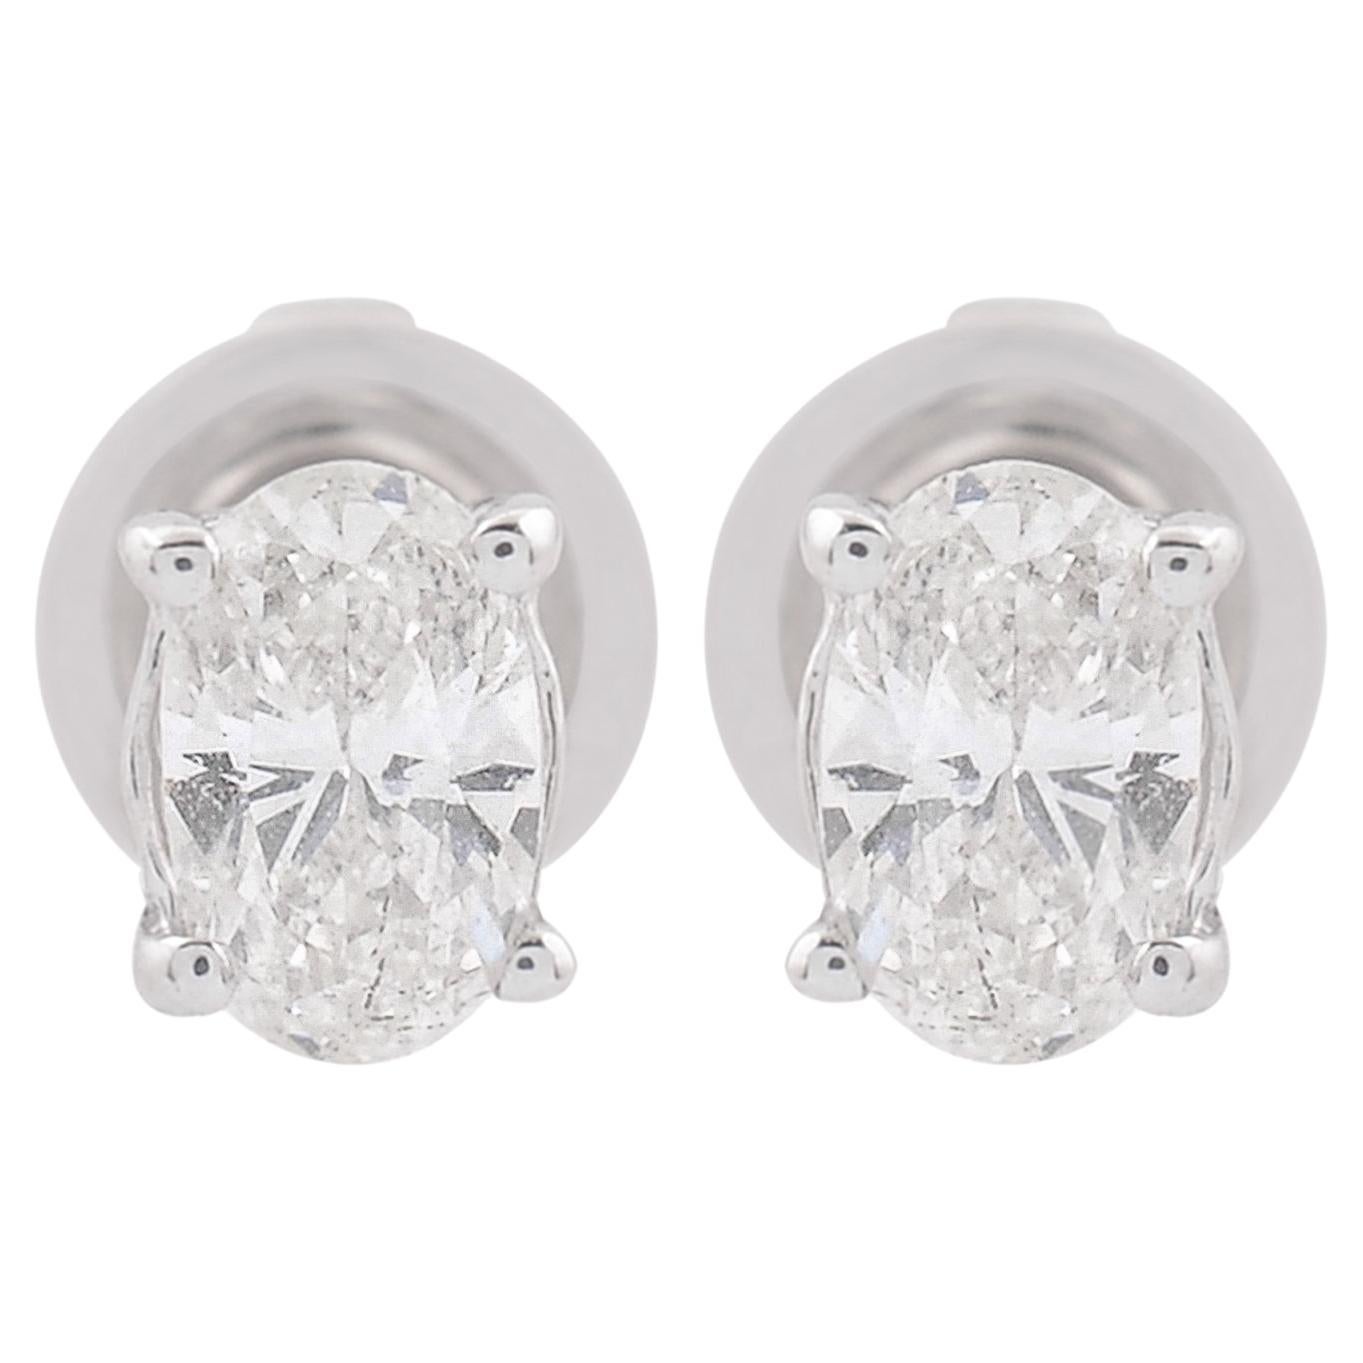 Natural 0.49 Carat Oval Shape Diamond Stud Earrings Solid 14k White Gold Jewelry